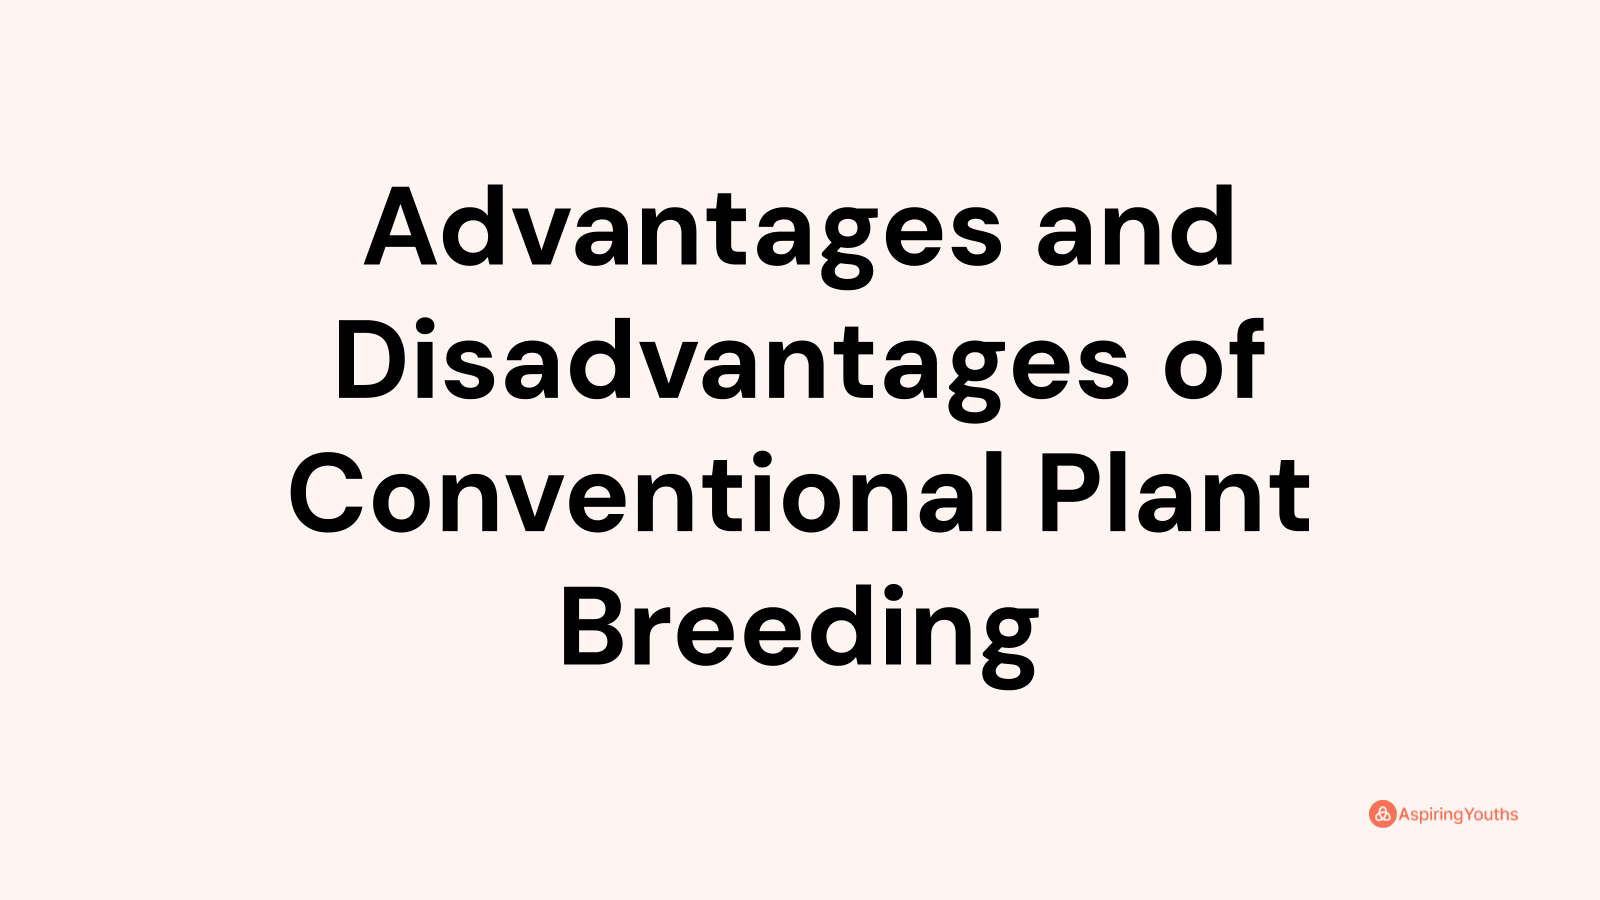 Advantages and disadvantages of Conventional Plant Breeding